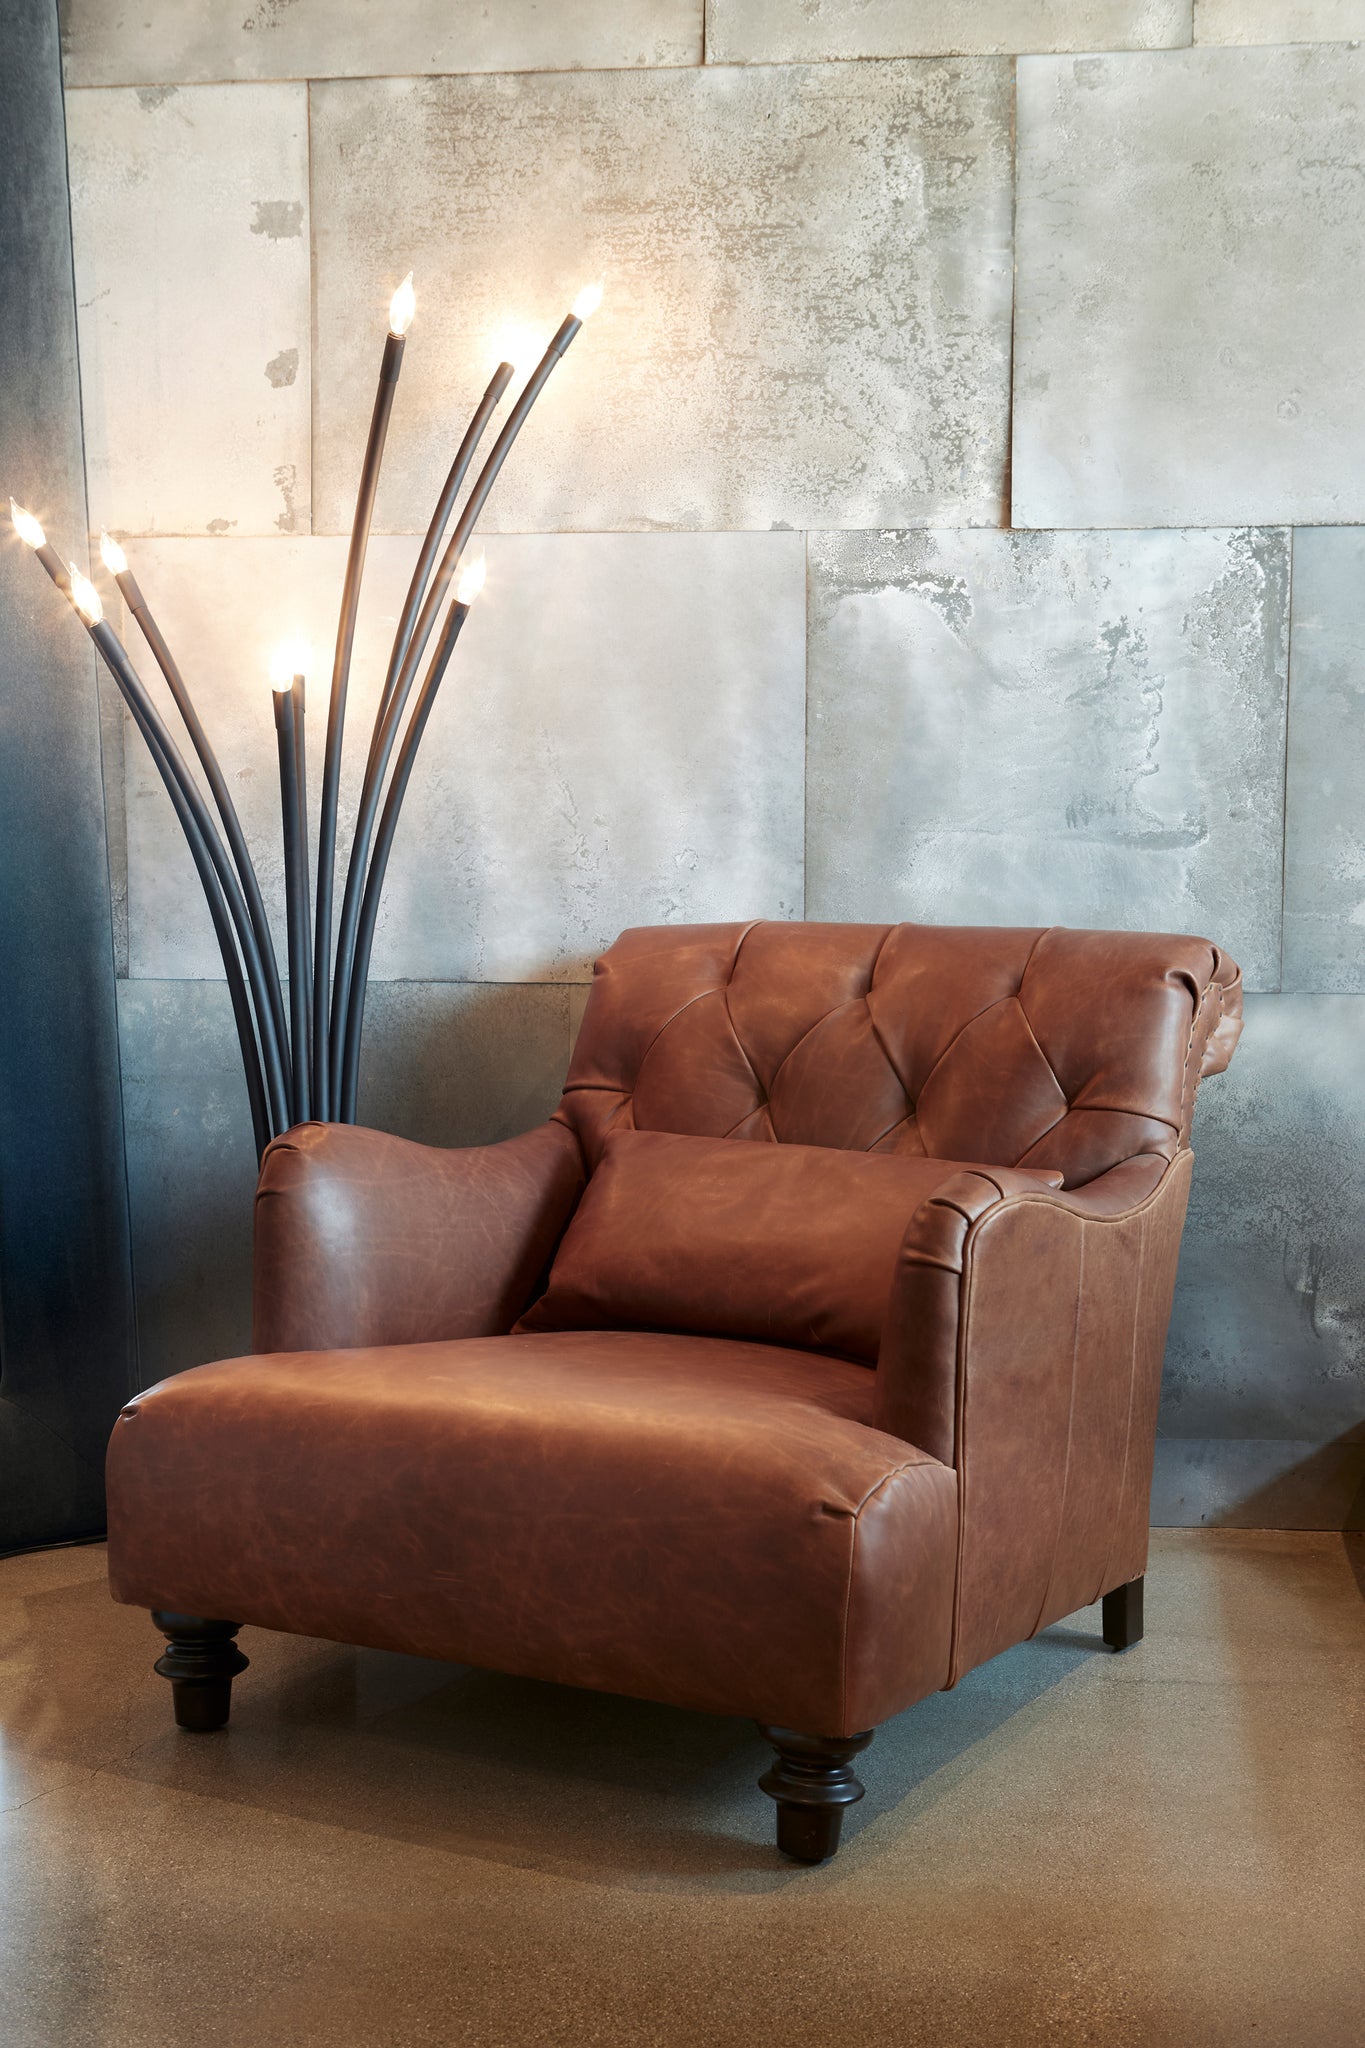  Brown leather chair in front of a metal tile wall. Floor lamp of the left. Photographed in Spur Terracotta. 